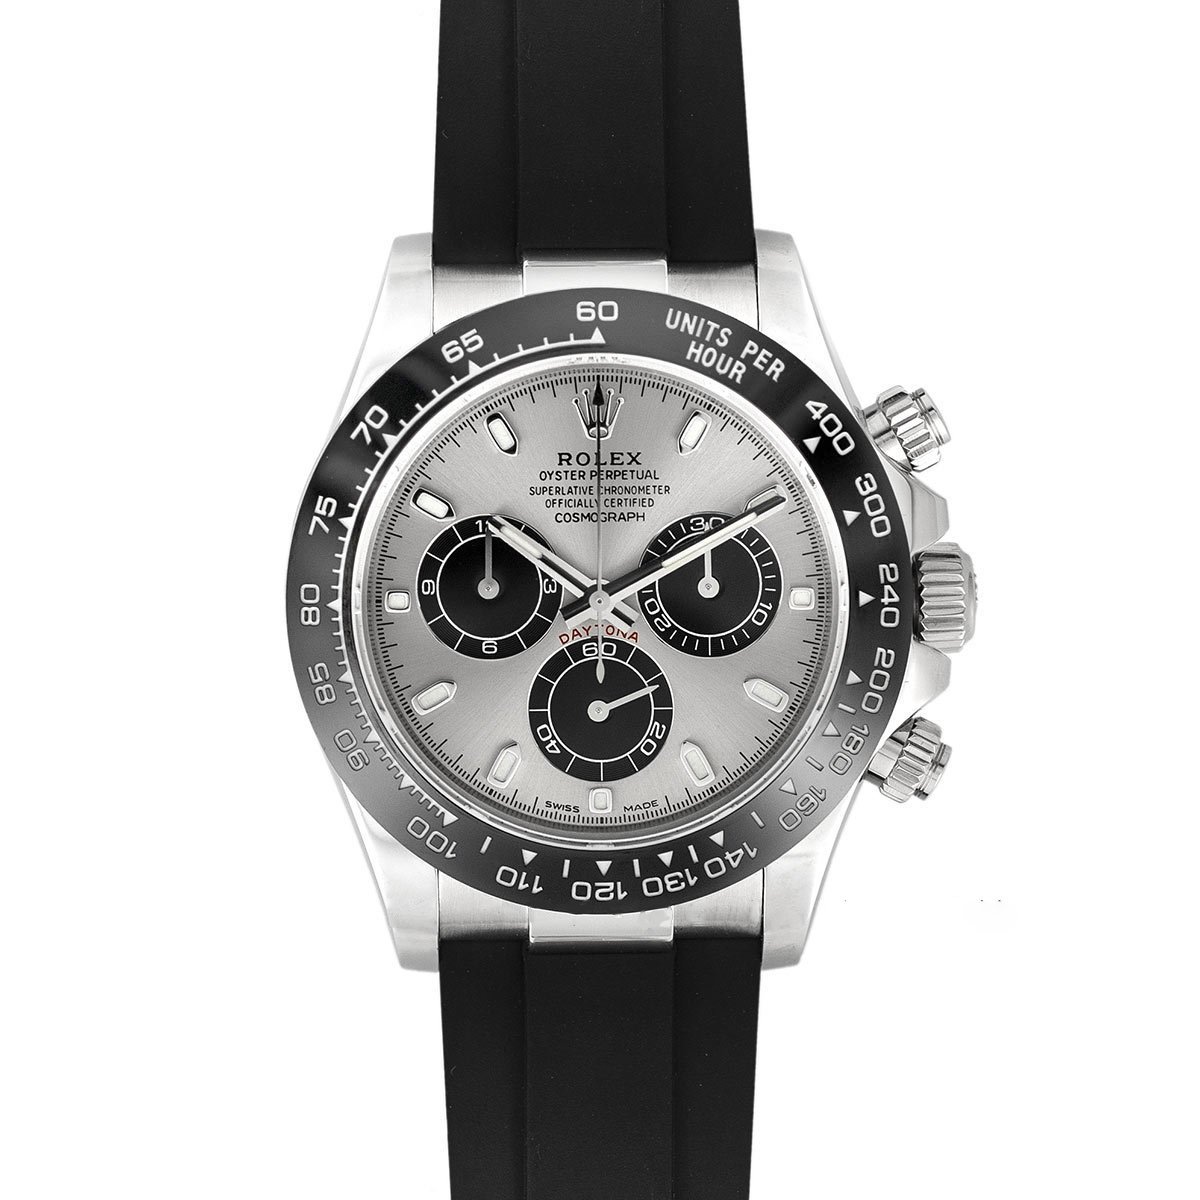 Daytona 116519LN Steel and Black Dial in White Gold - Hont Watch